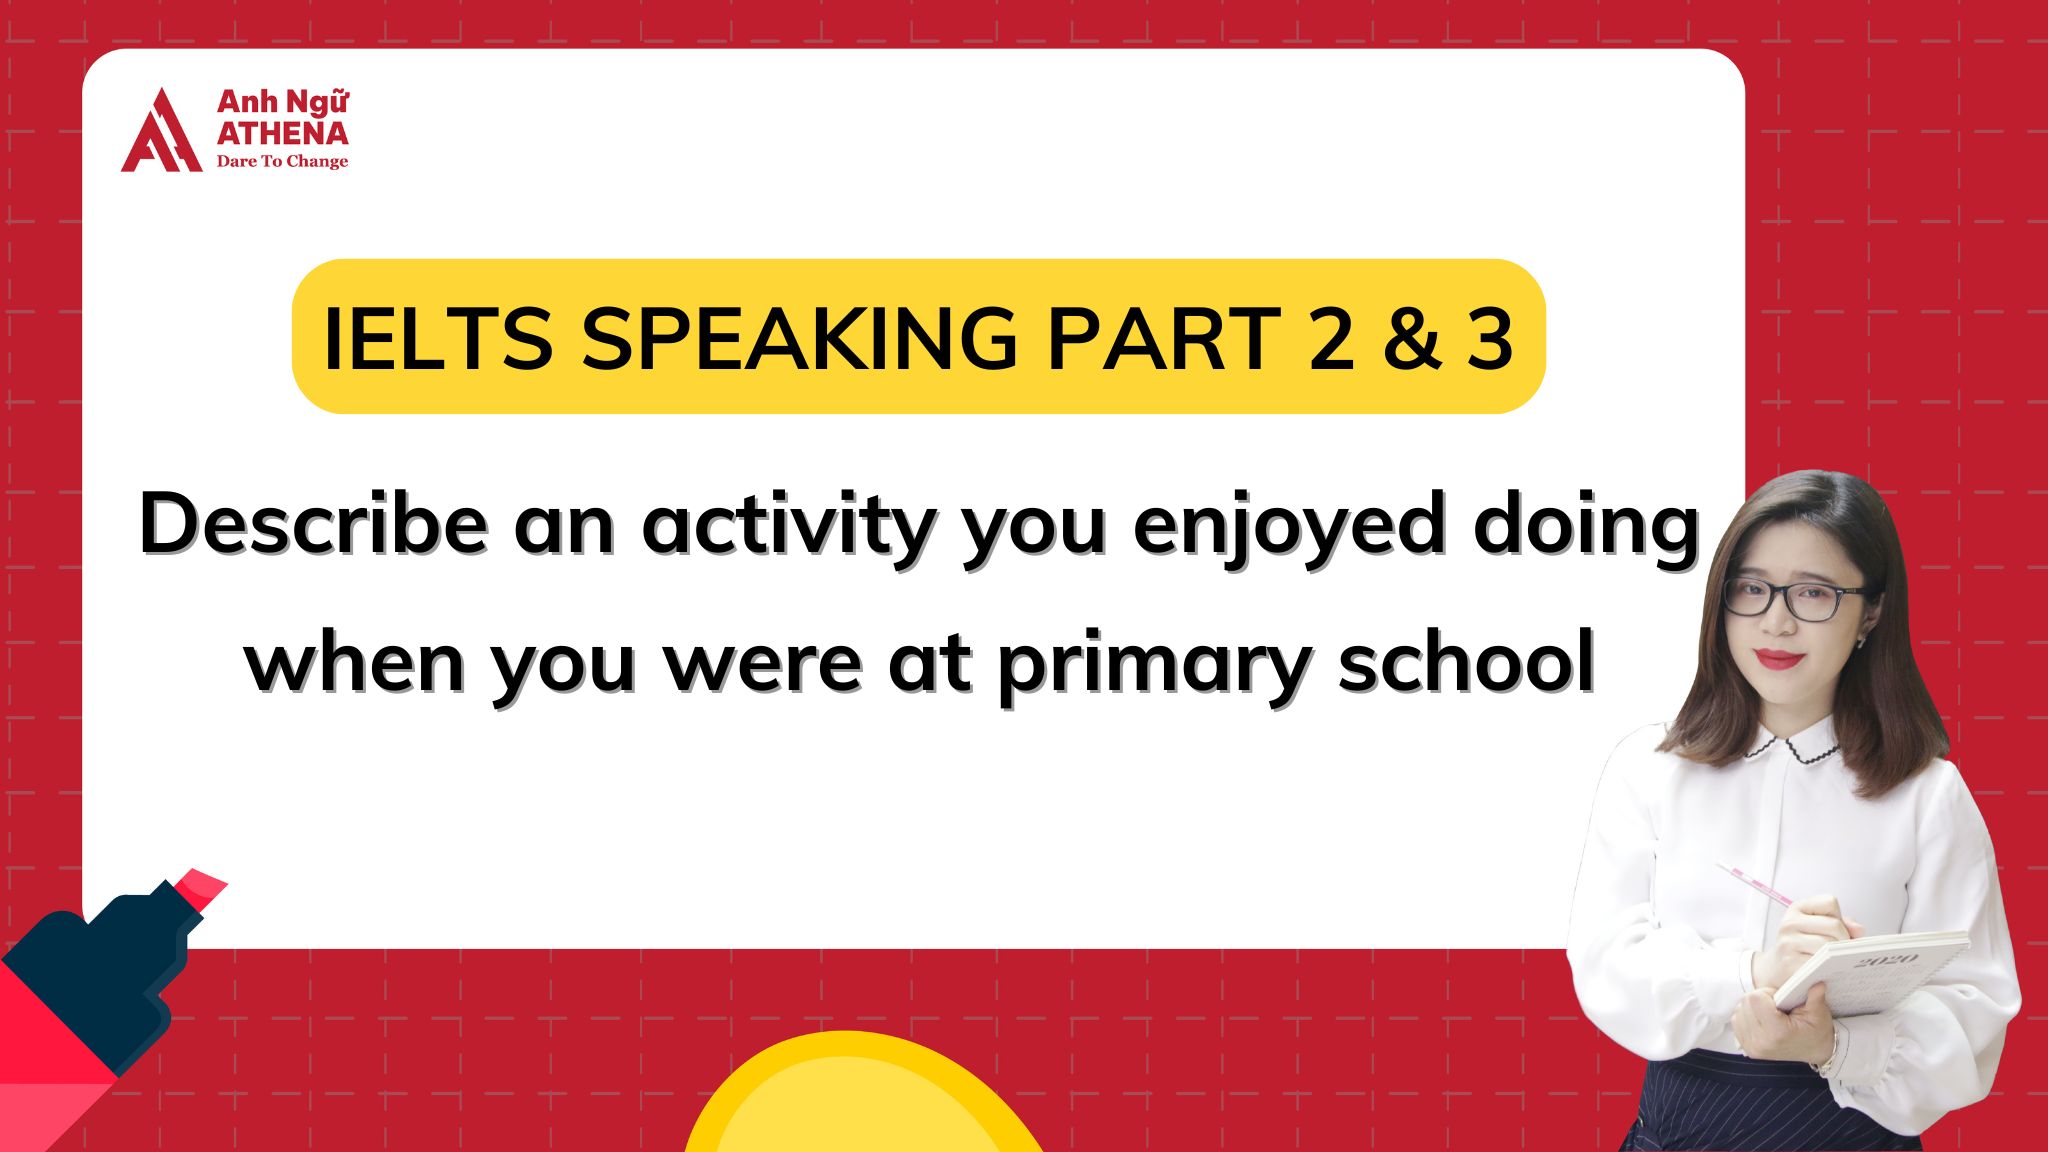 Giải đề: Describe an activity you enjoyed doing when you were at primary school